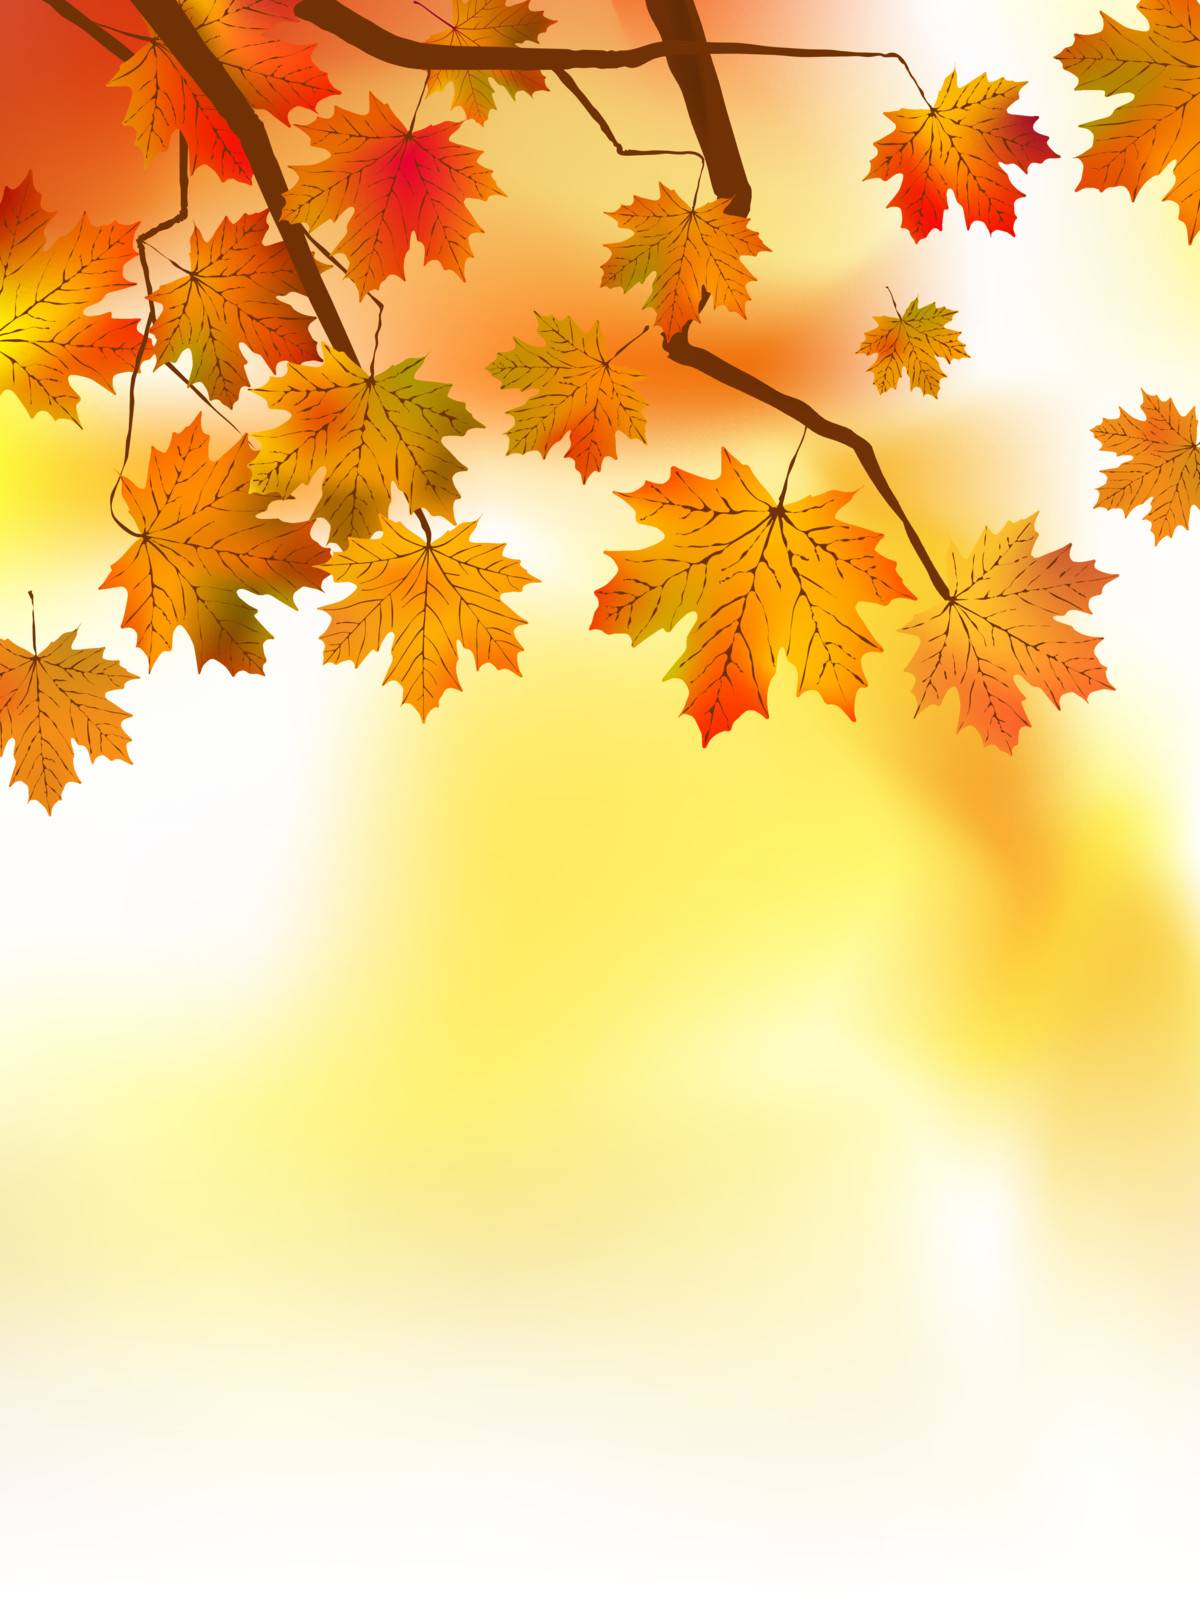 Autumnal leaf of maple and sunlight. EPS 8 vector file included